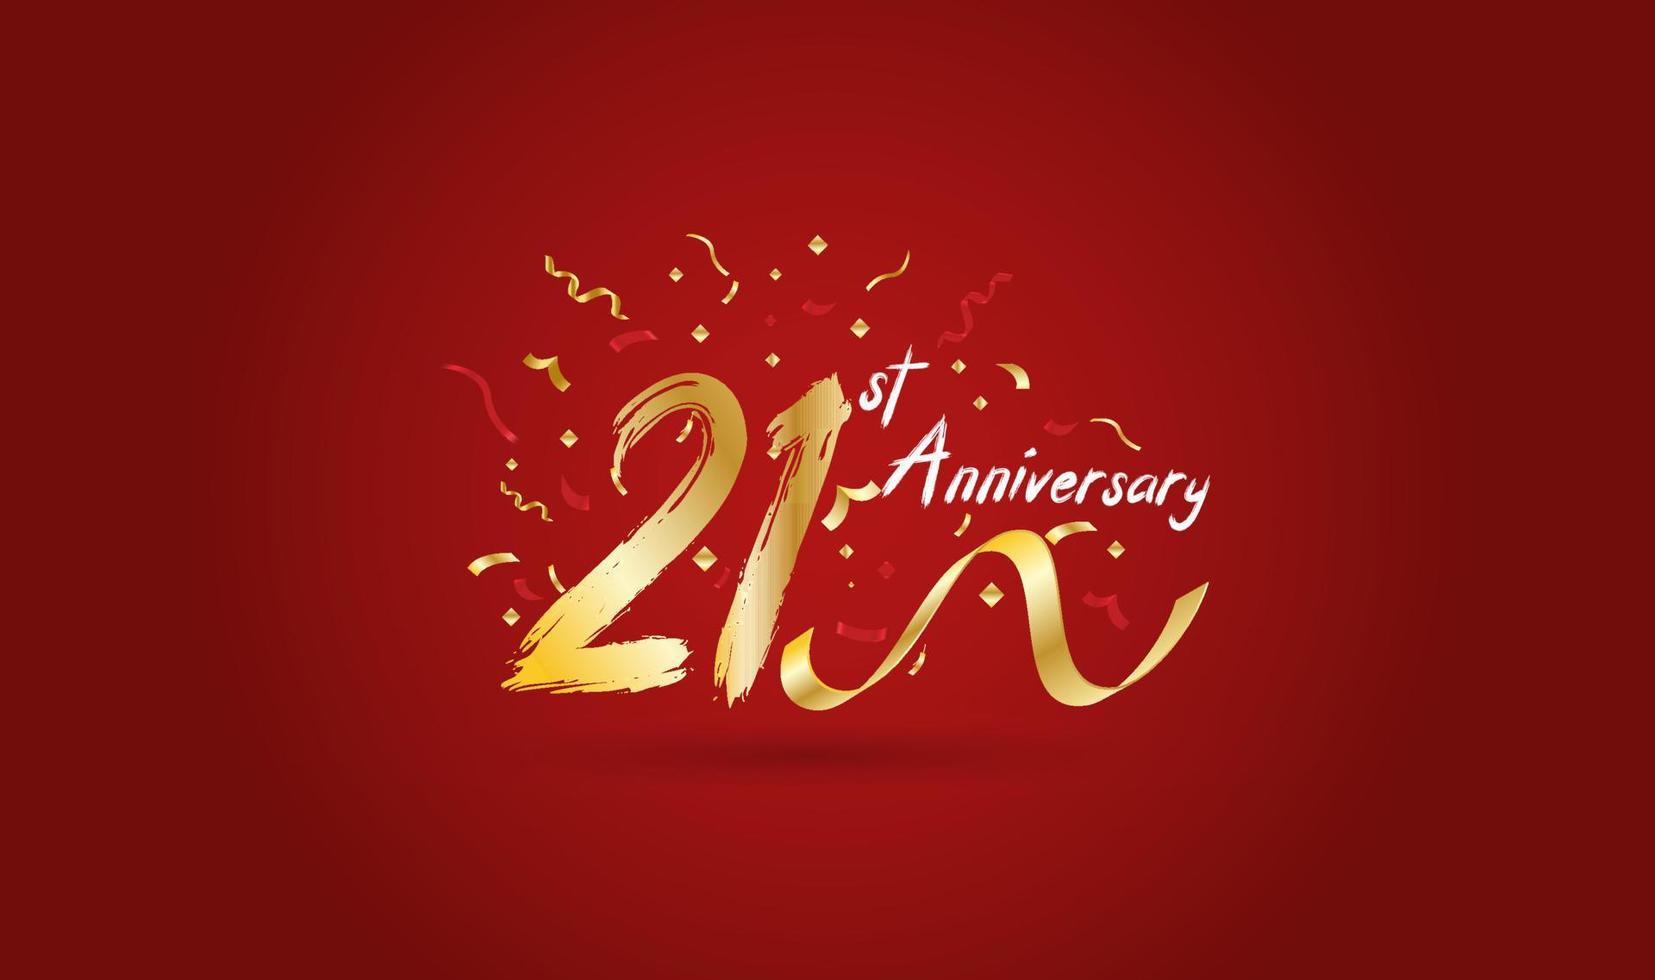 Anniversary celebration background. with the 21st number in gold and with the words golden anniversary celebration. vector